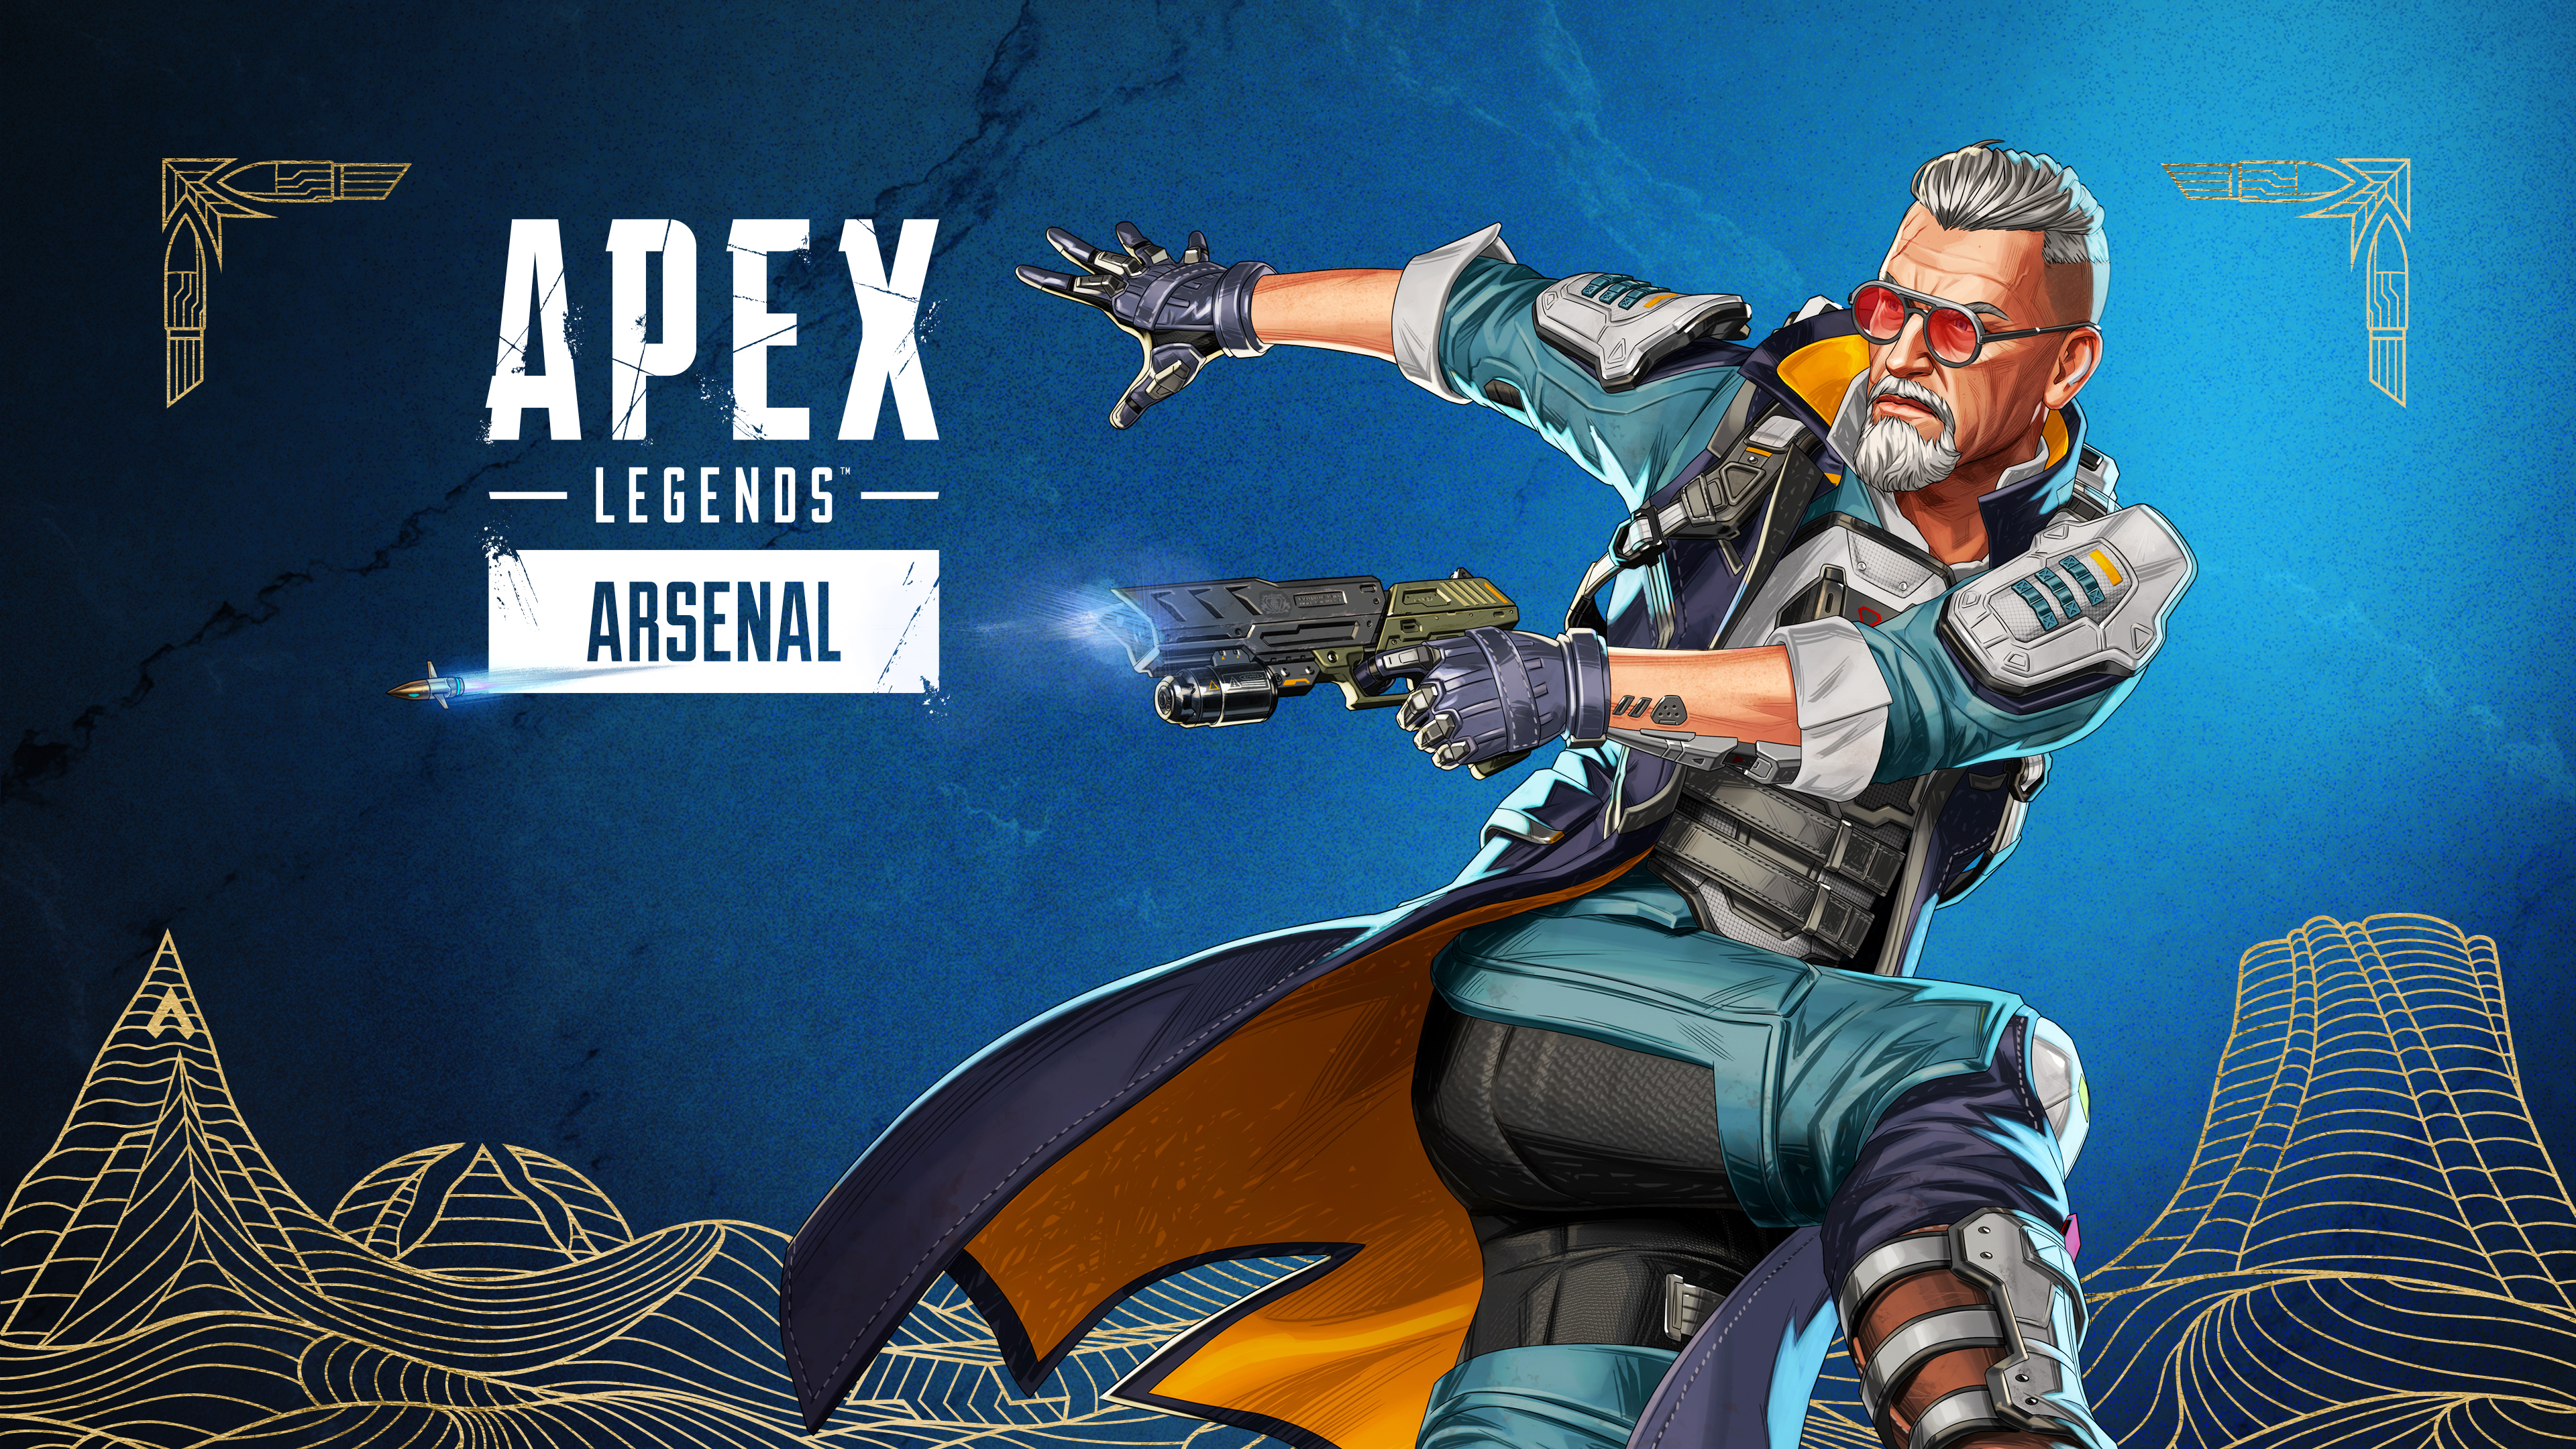 Apex Legends Arsenal – the New Season Starts Today and Includes a New Legend, Major World’s Edge Map Updates, and Much More